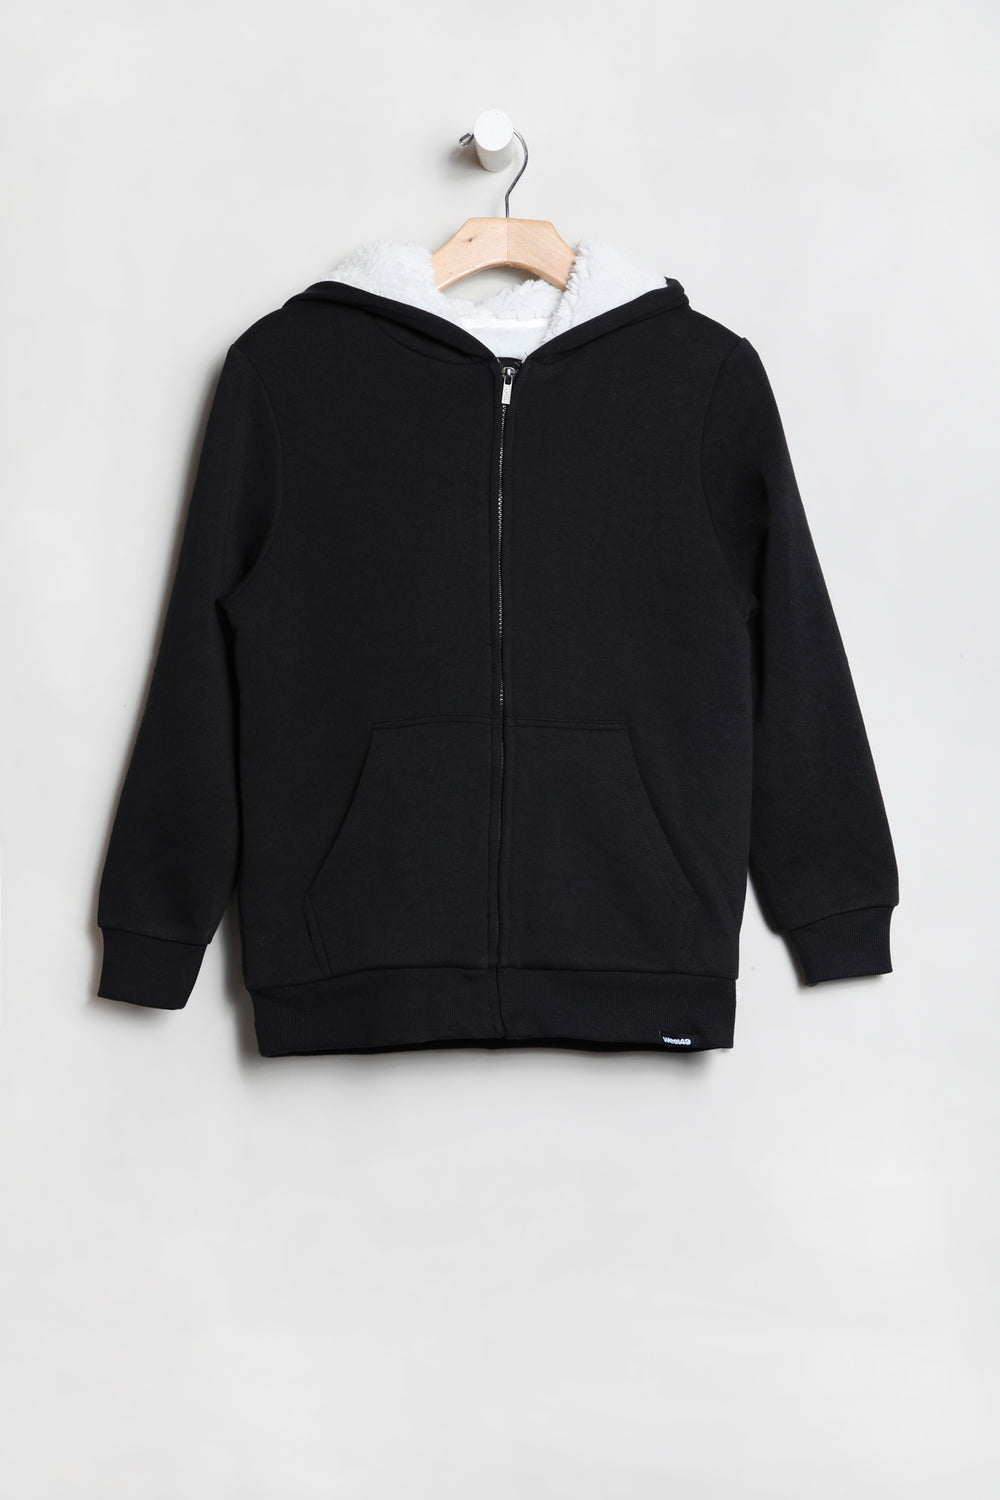 West49 Youth Sherpa Lined Zip-Up Hoodie Black